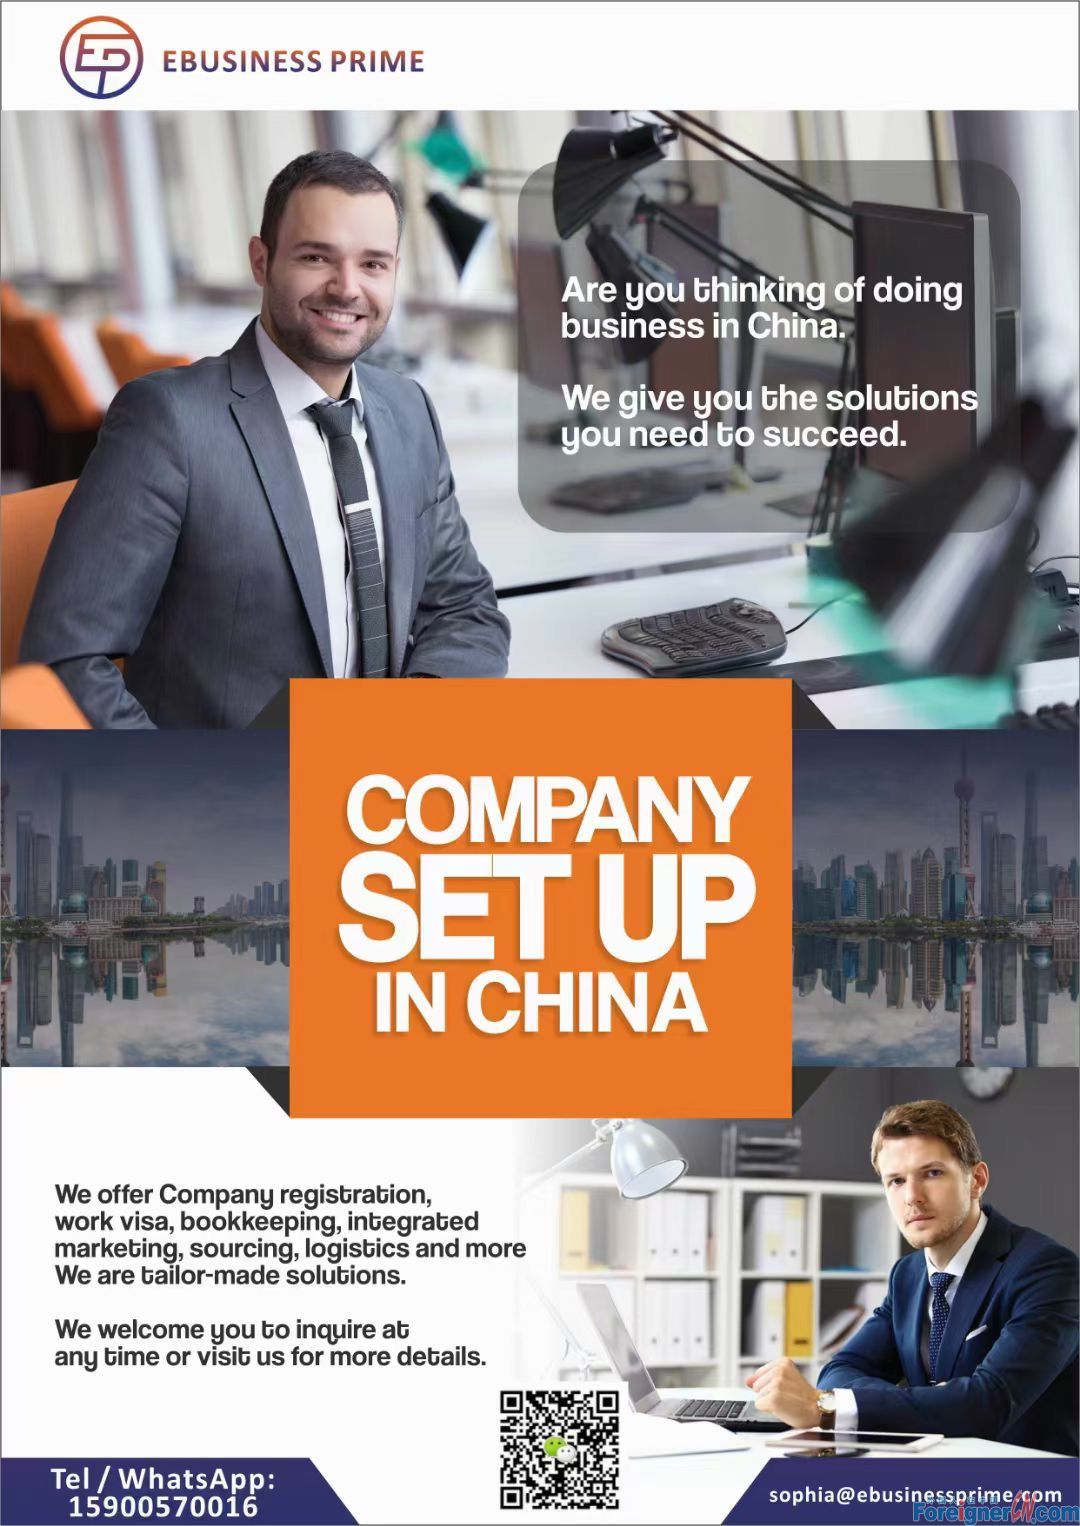 Company registration services in china For Affordable,China Company Registration | Trademark & Copyright, China Company Registry, Set Up Company ,China Company Formation Registration Expert,China Company Registration, Company Setup in China